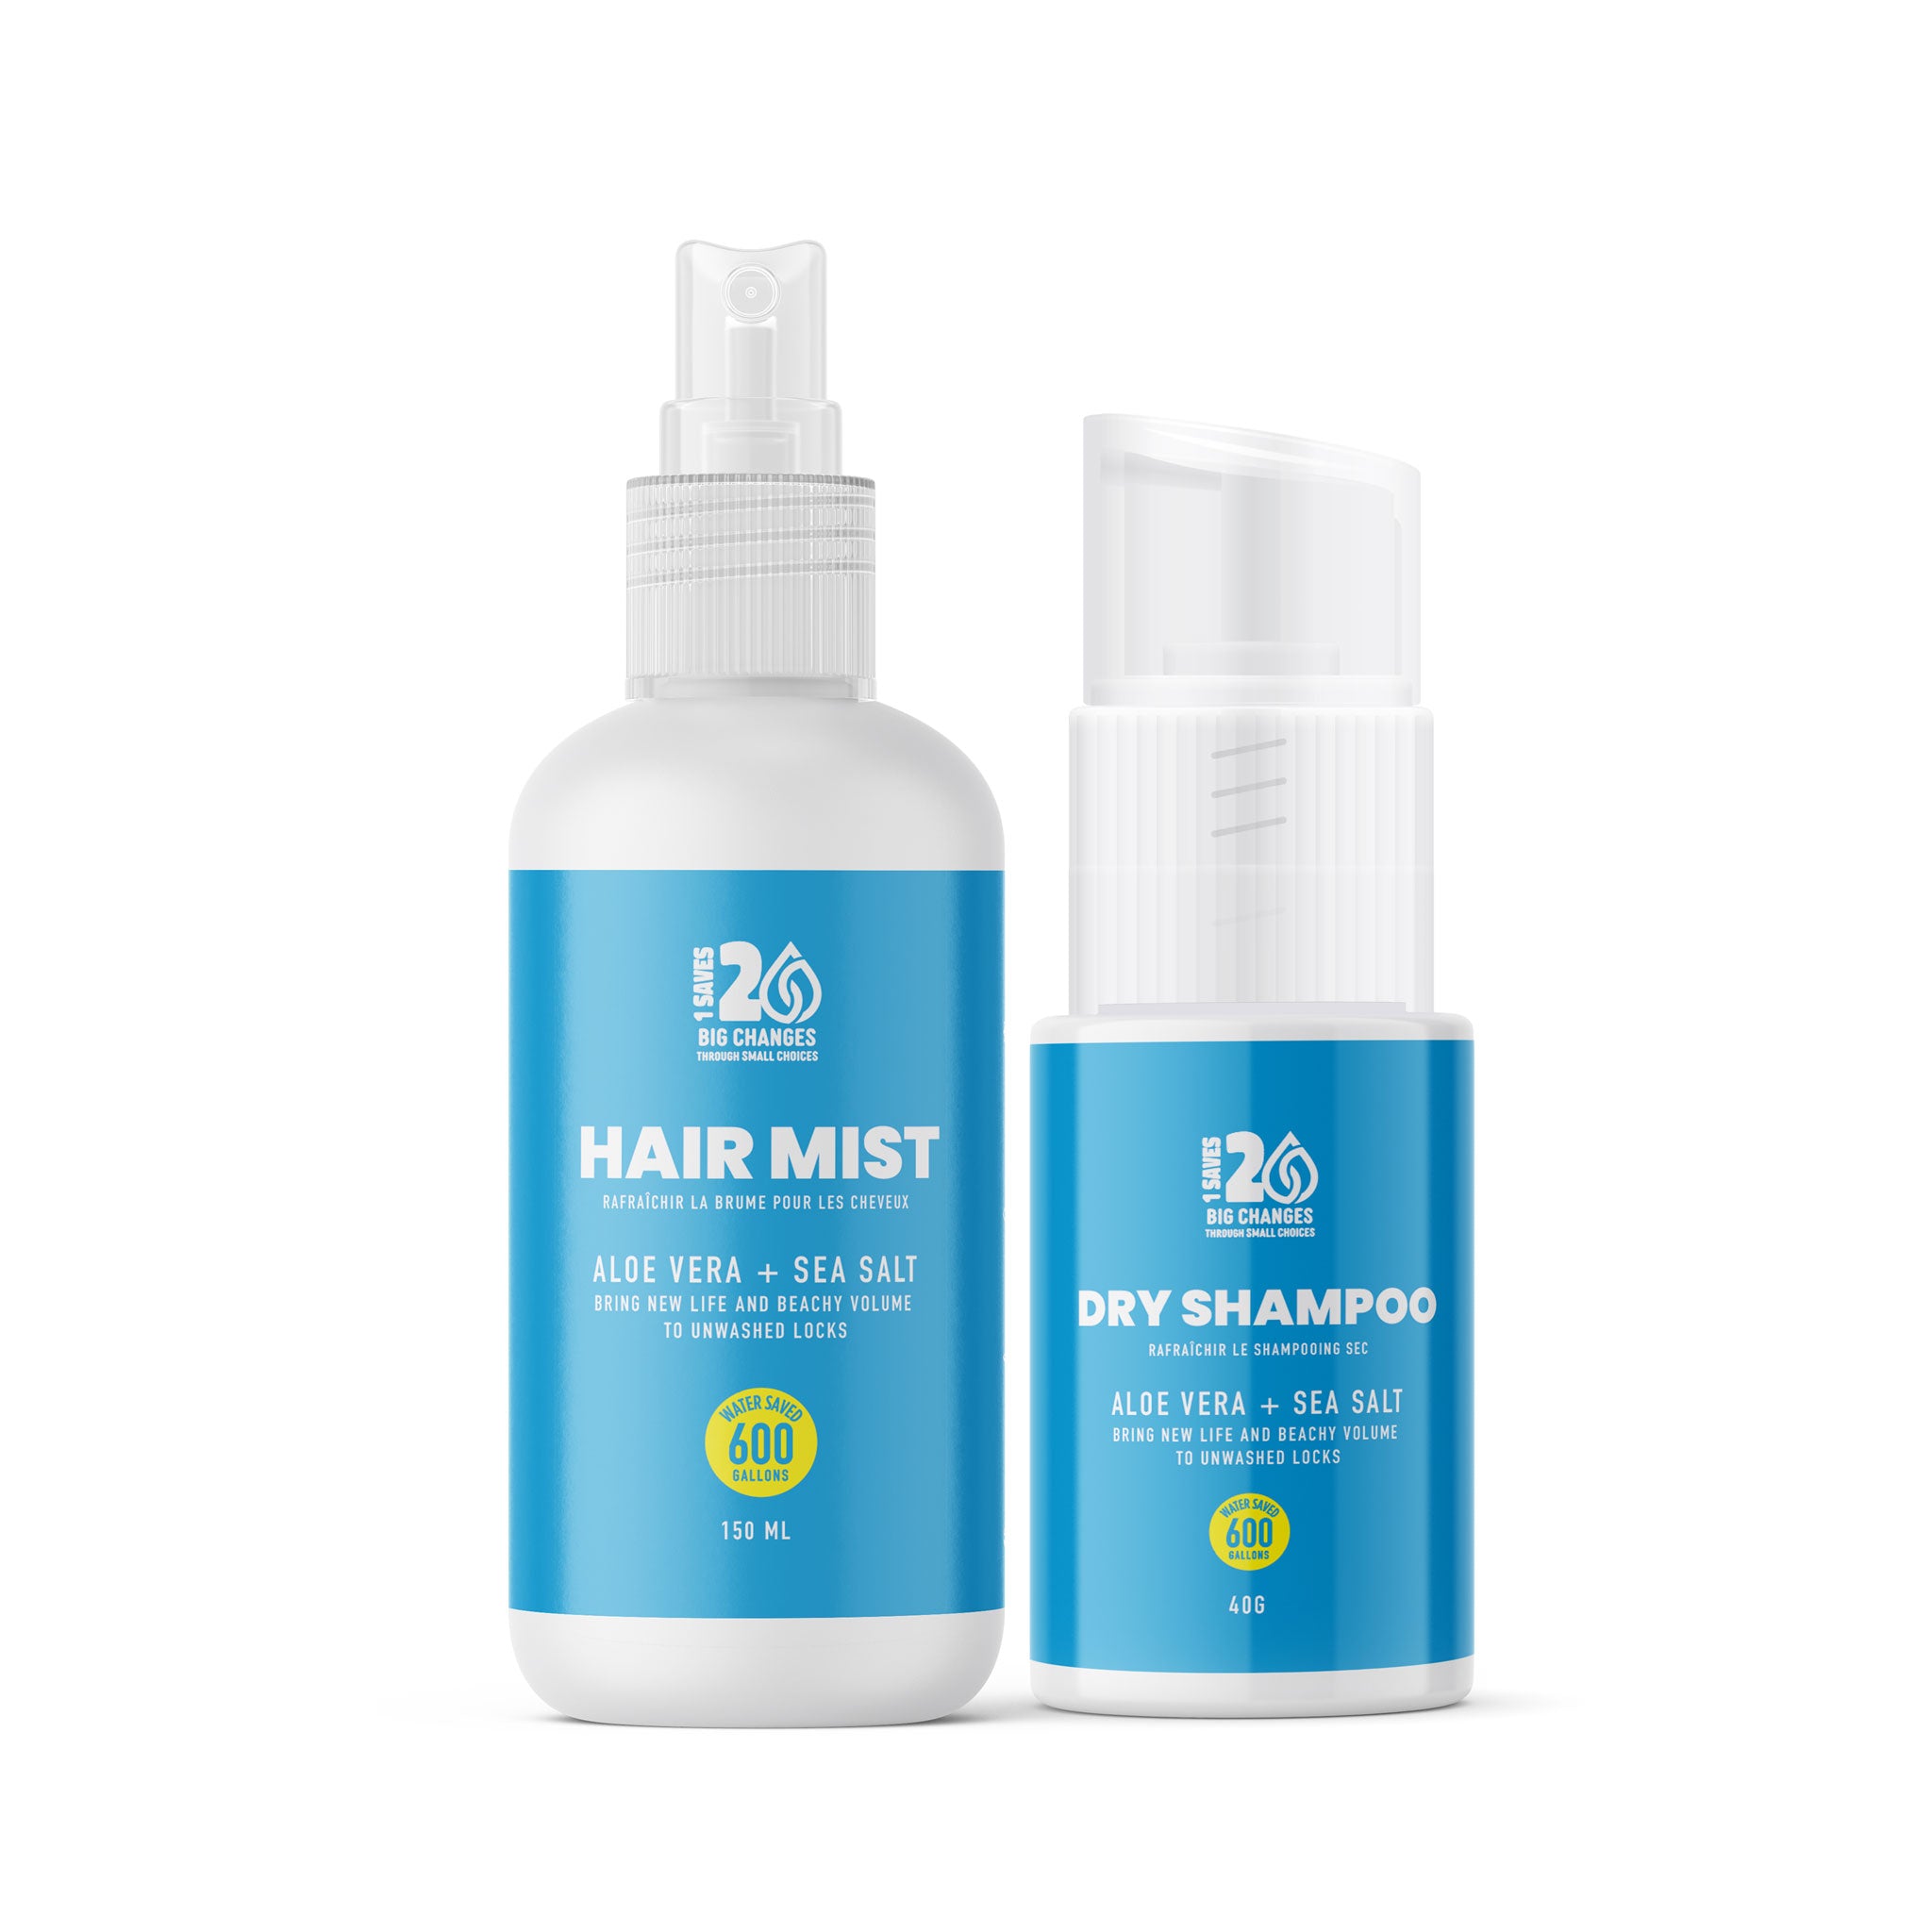 The Refresh Hair Care Collection